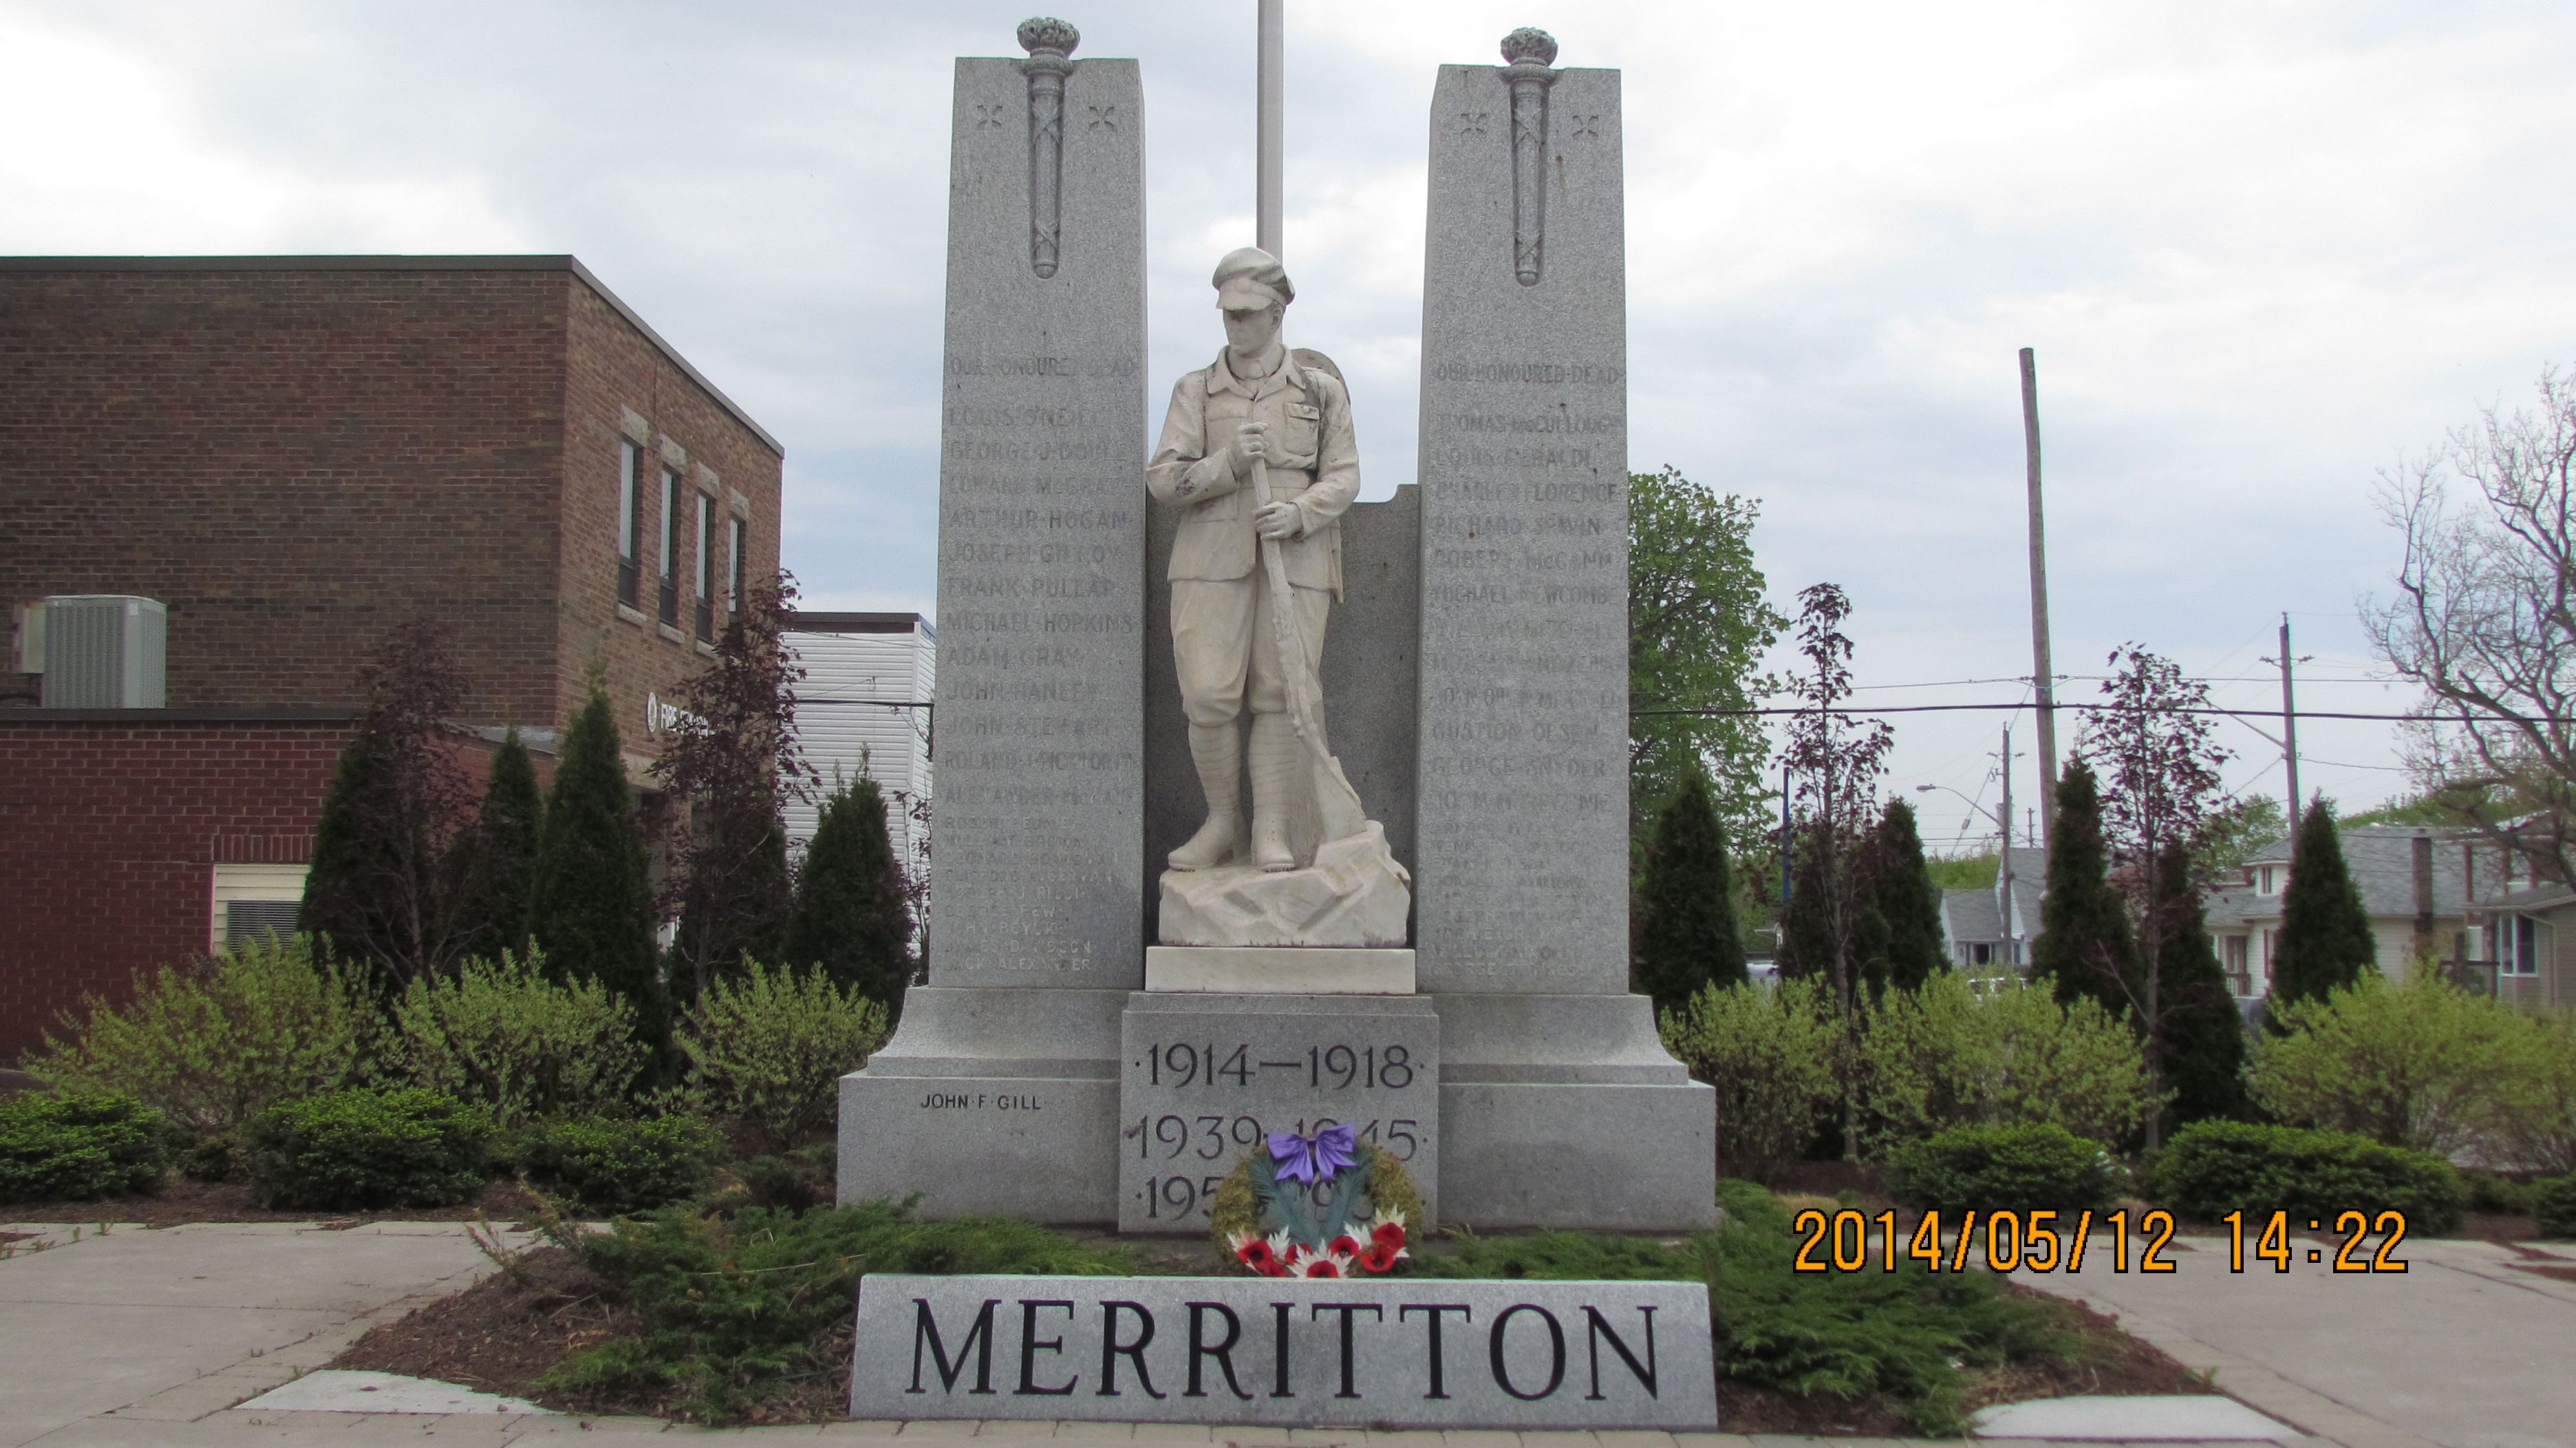 A picture of the Merritton Cenotaph from a distance in 2014.